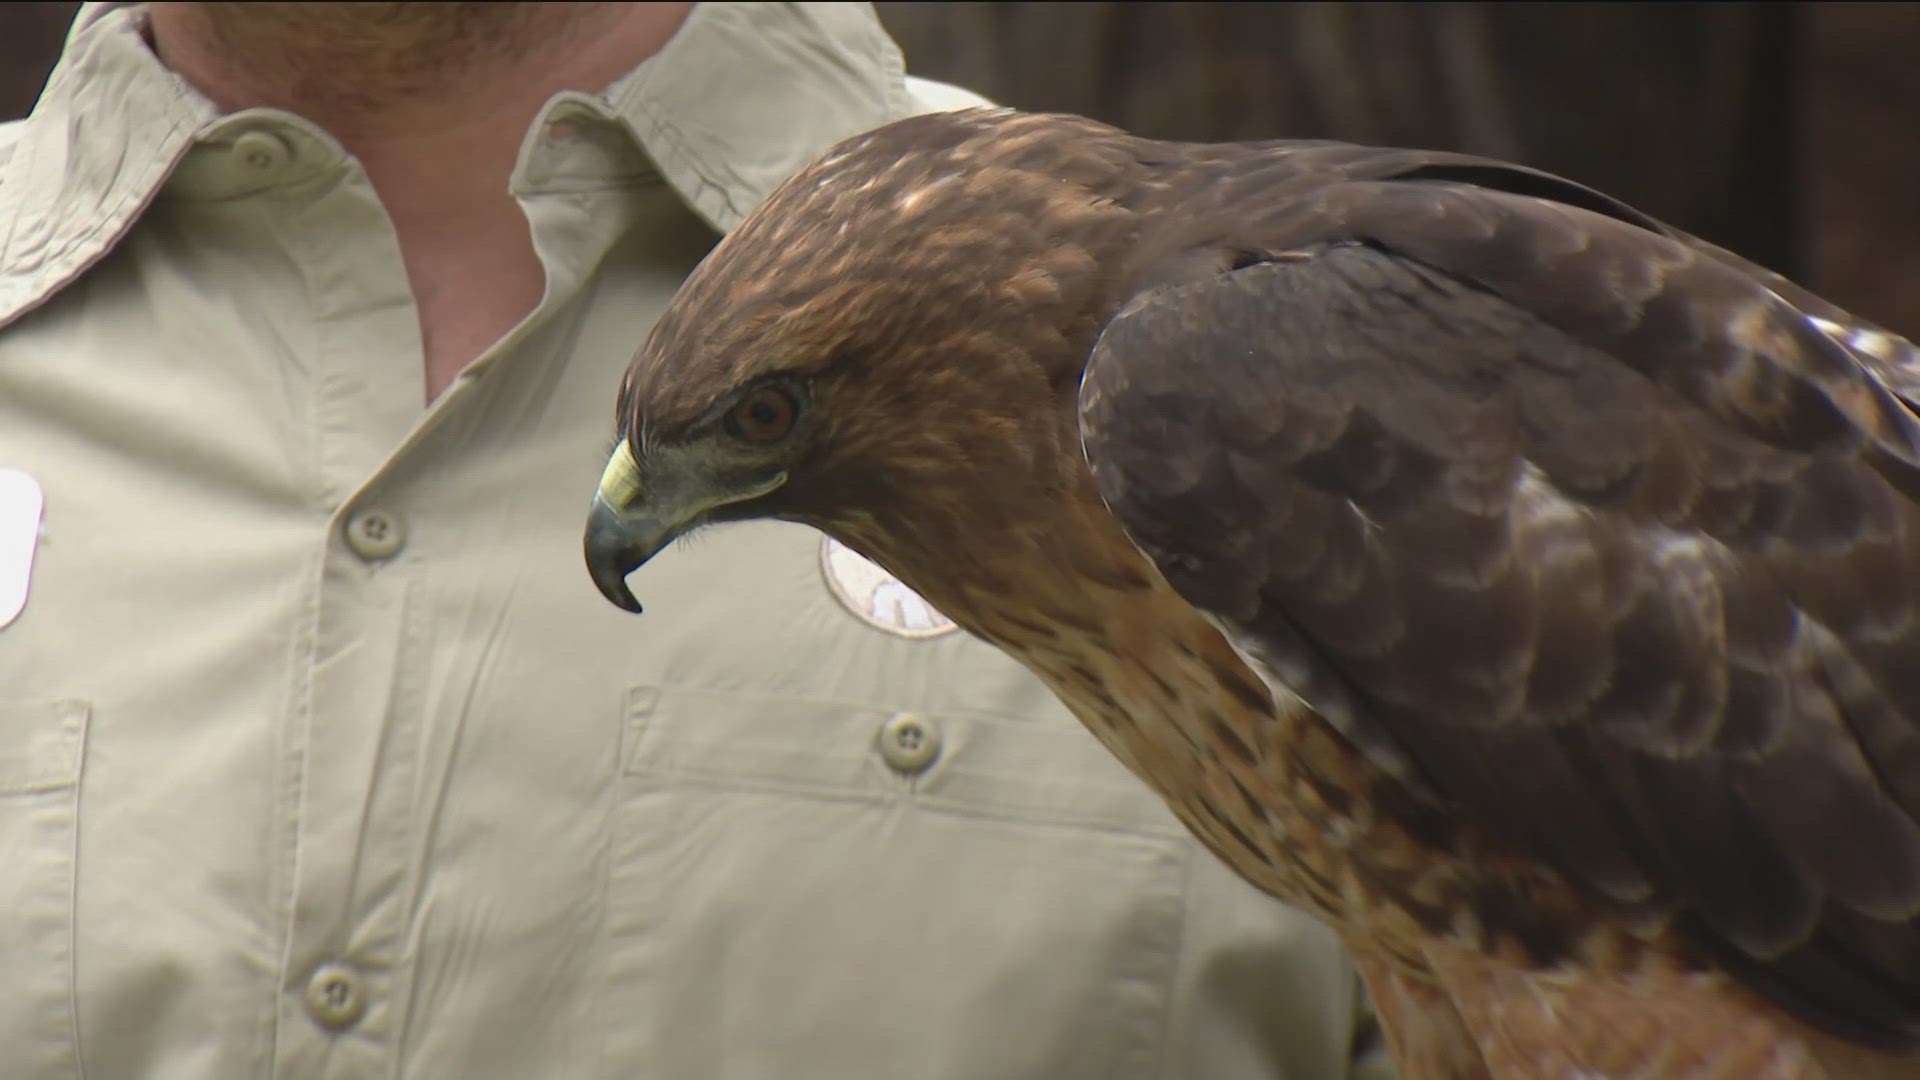 The San Diego Zoo takes us behind the scenes to learn about raptors.